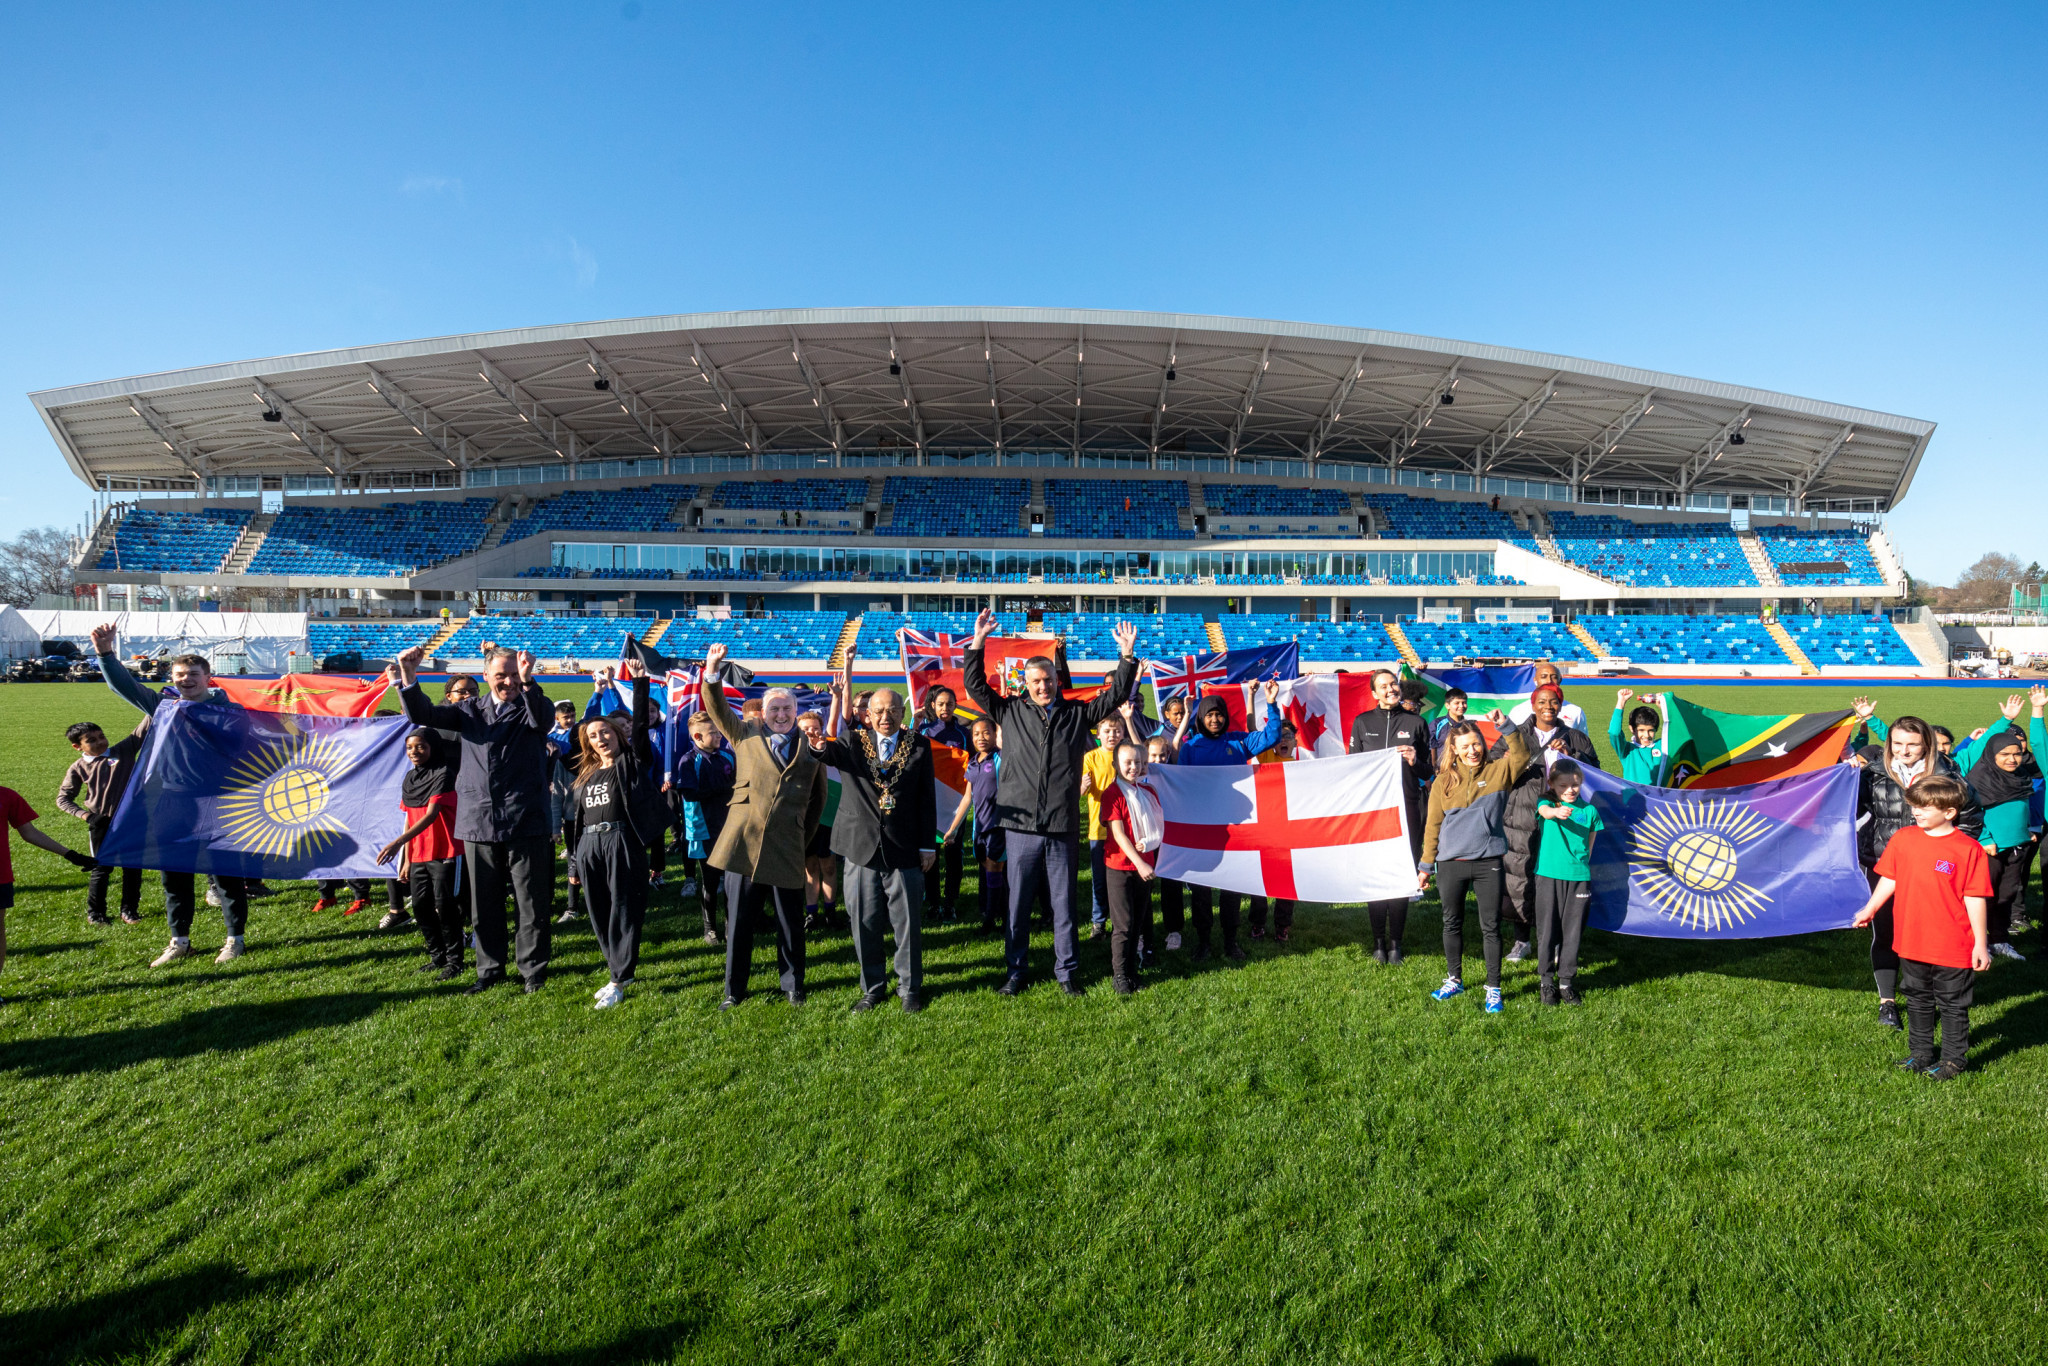 Alexander Stadium a "fitting stage" as focal Birmingham 2022 venue nears completion